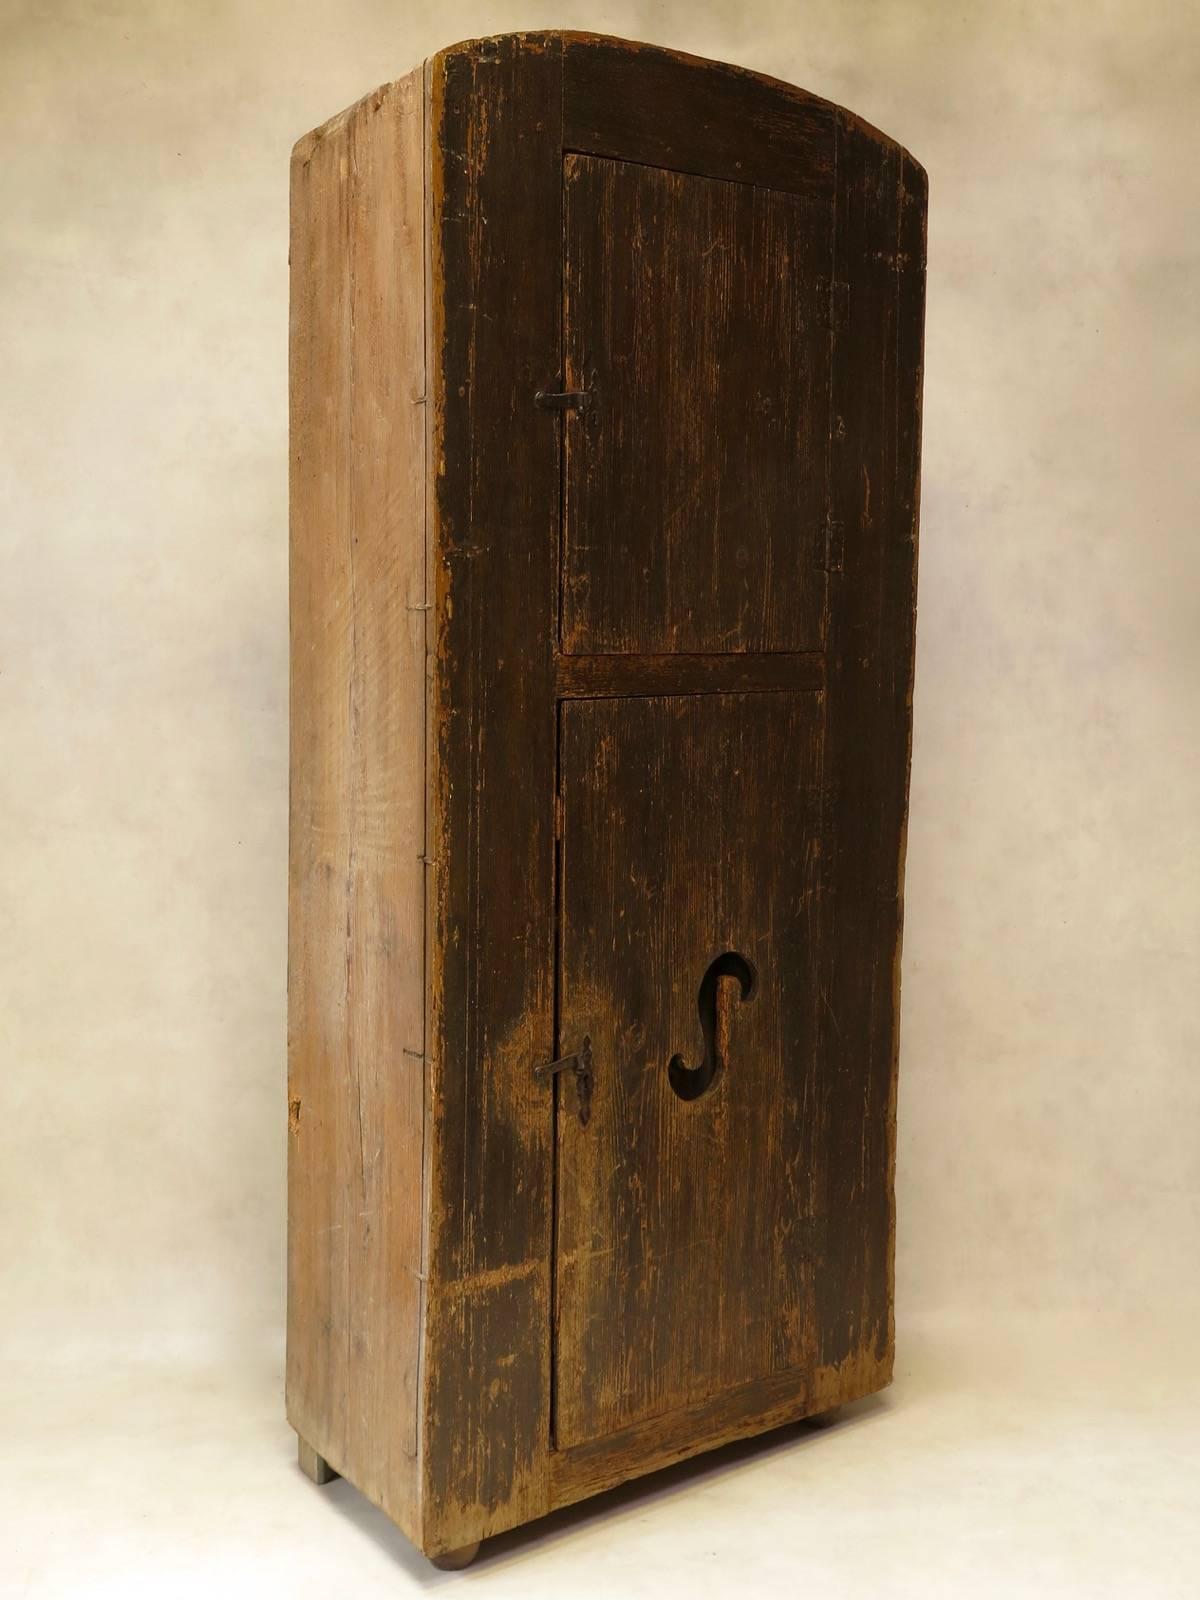 Unusual rustic two-door pinewood cupboard. The façade is painted in a faux-bois finish. Cut-out detail on the lower cupboard door backed in wire mesh. The back and sides are rough-hewn, as it would originally have been encased in a wall, with only